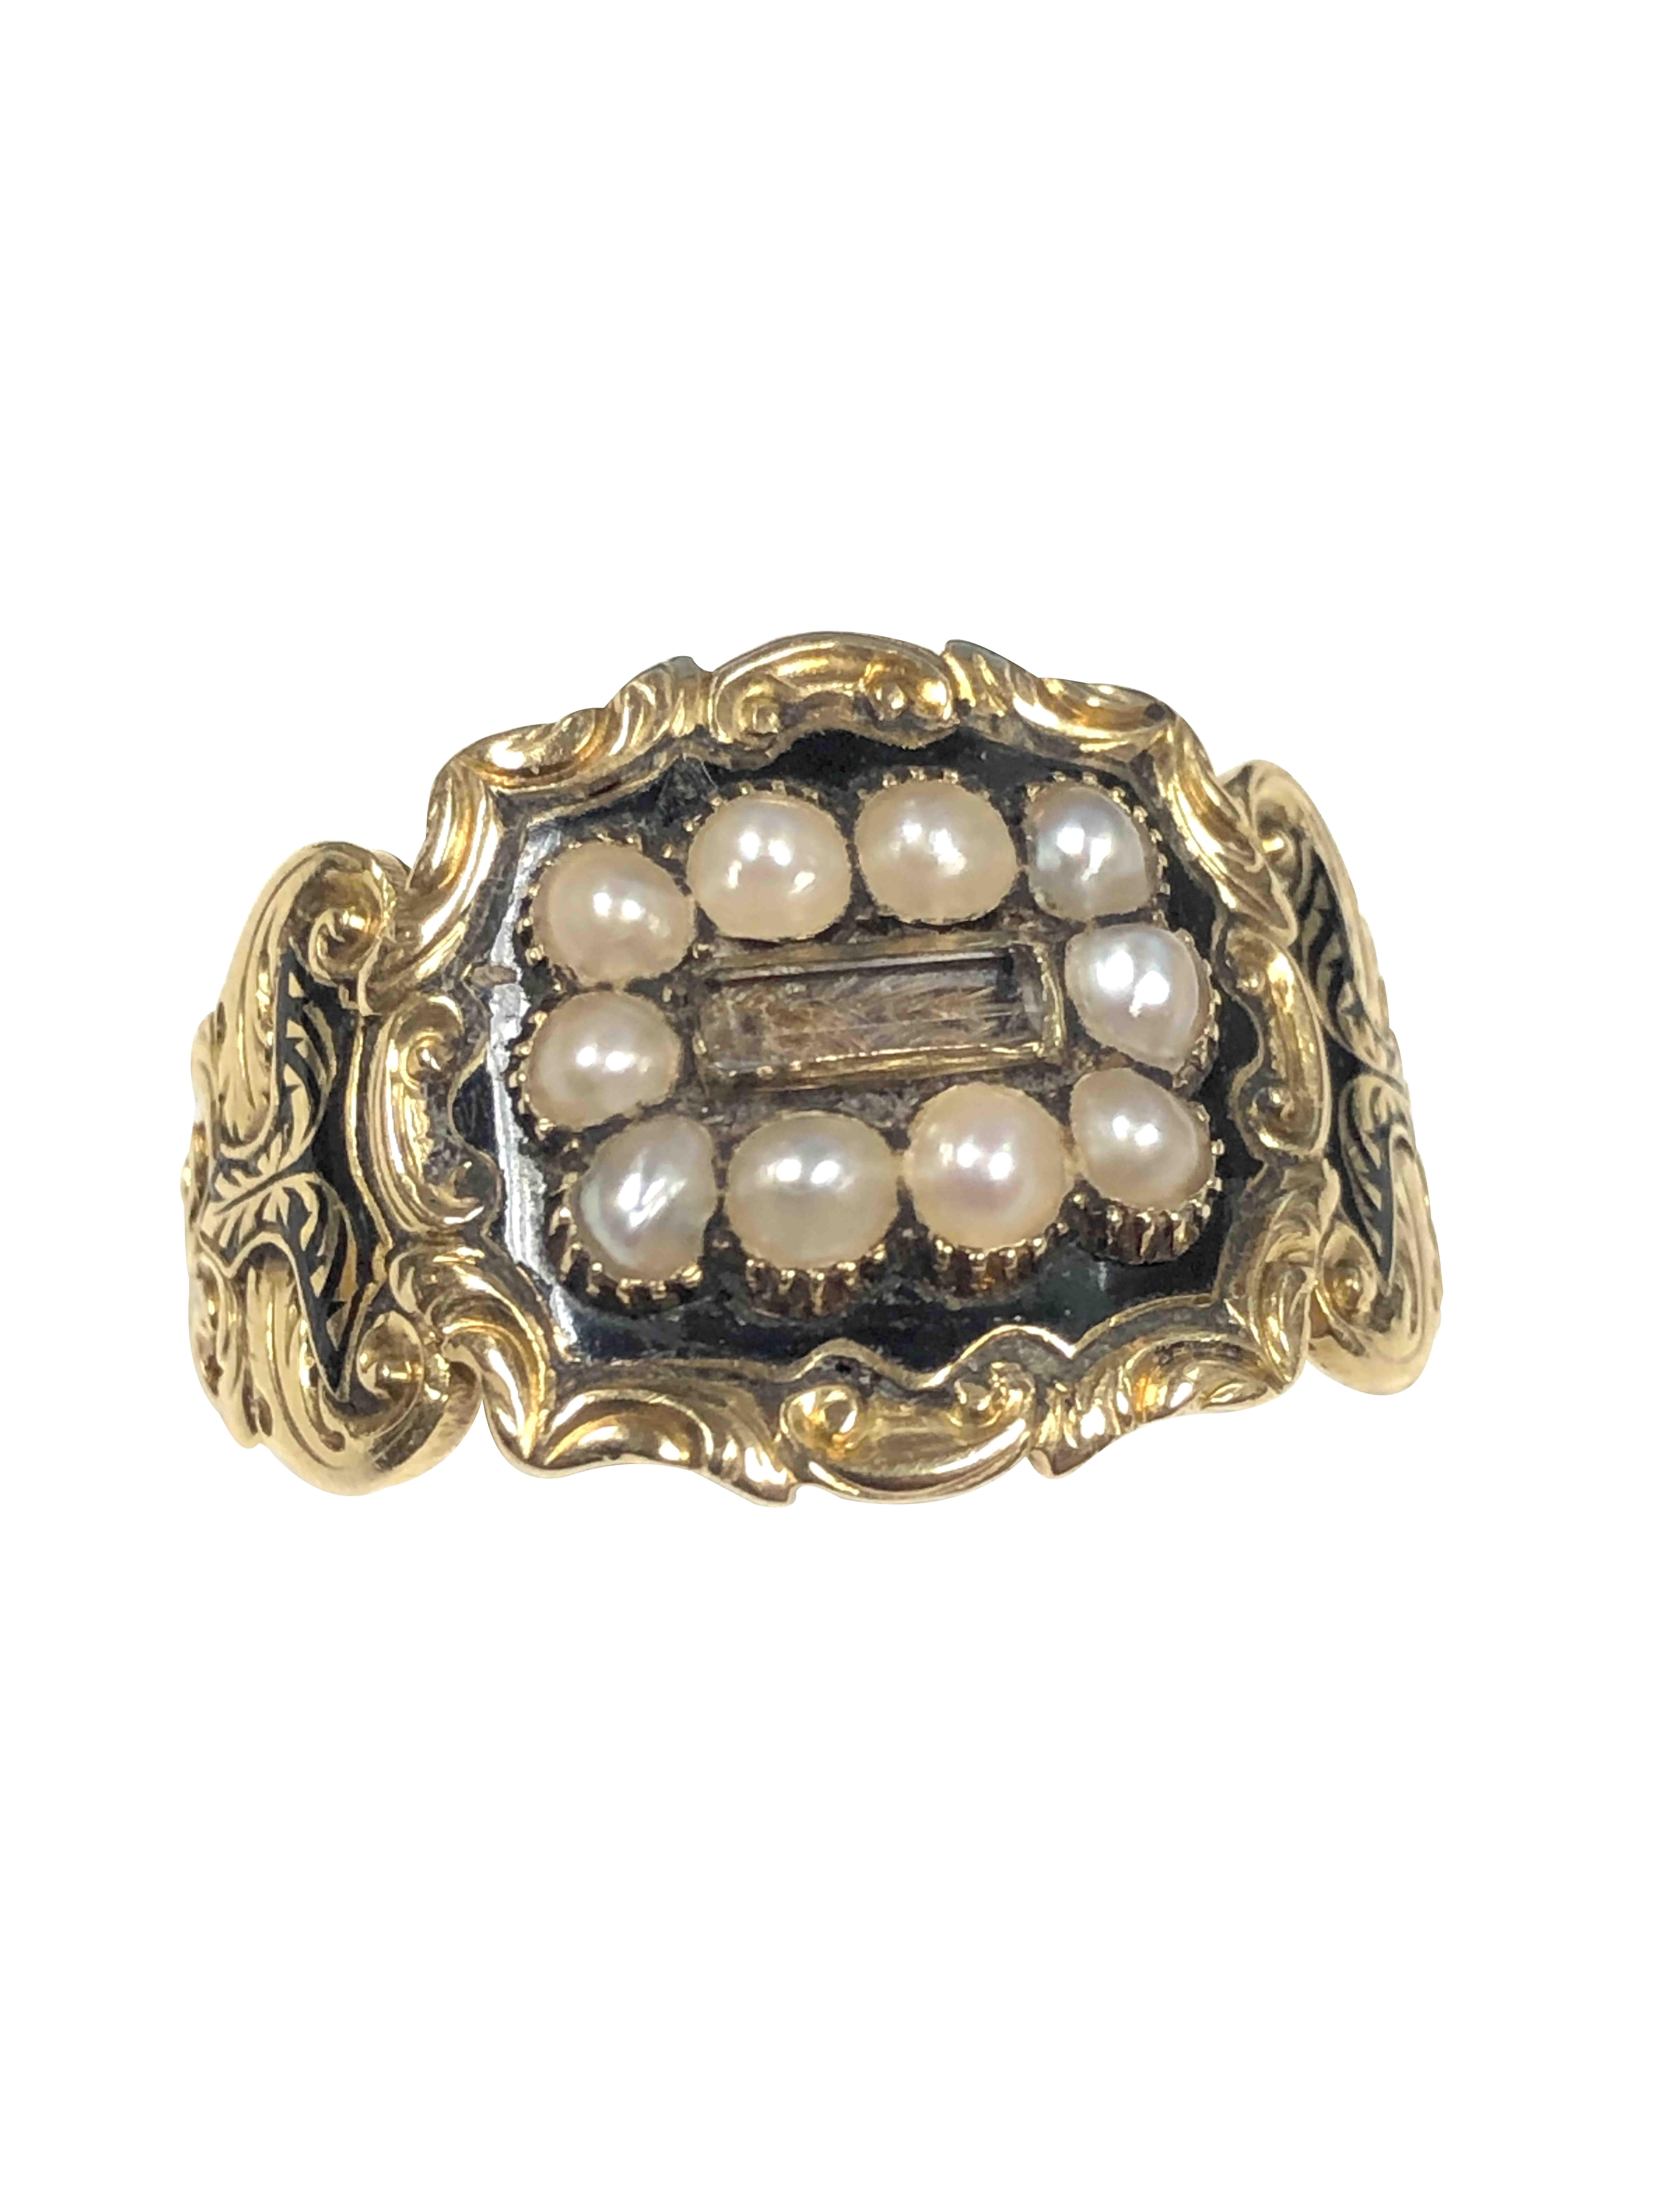 Circa 1827 18K Yellow Gold Memorial, Memento Ring, measuring 5/8 X 1/2 inch across the top, set with Pearls and having a a tiny bit of hair set under Glass in the center of the ring top, further finished in Black enamel. Engraved with Names and